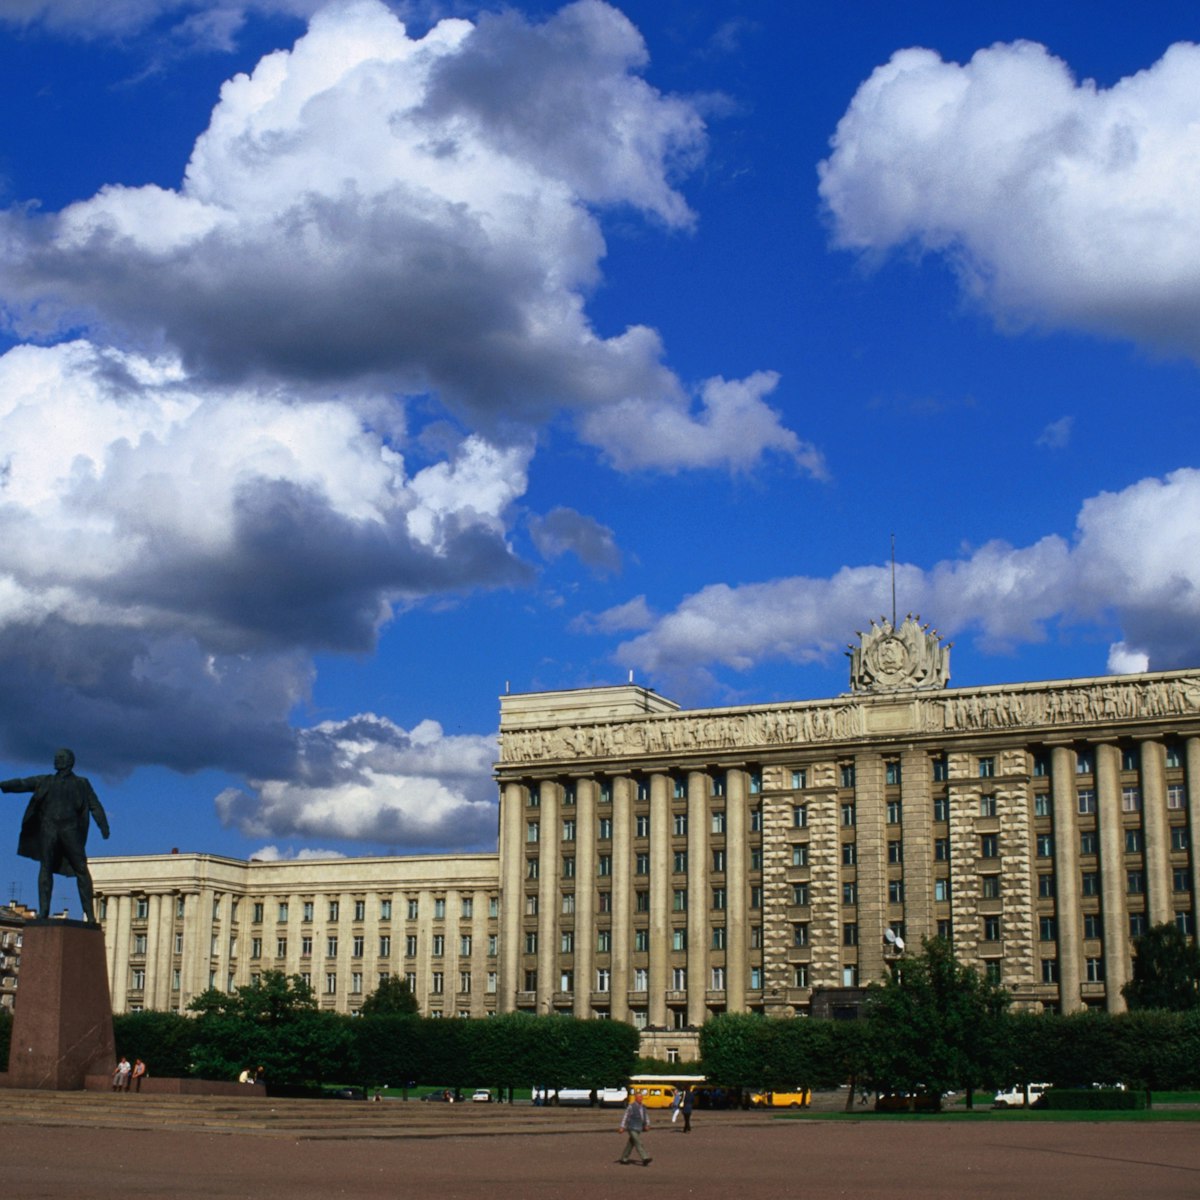 House of the Soviets and Lenin statue.